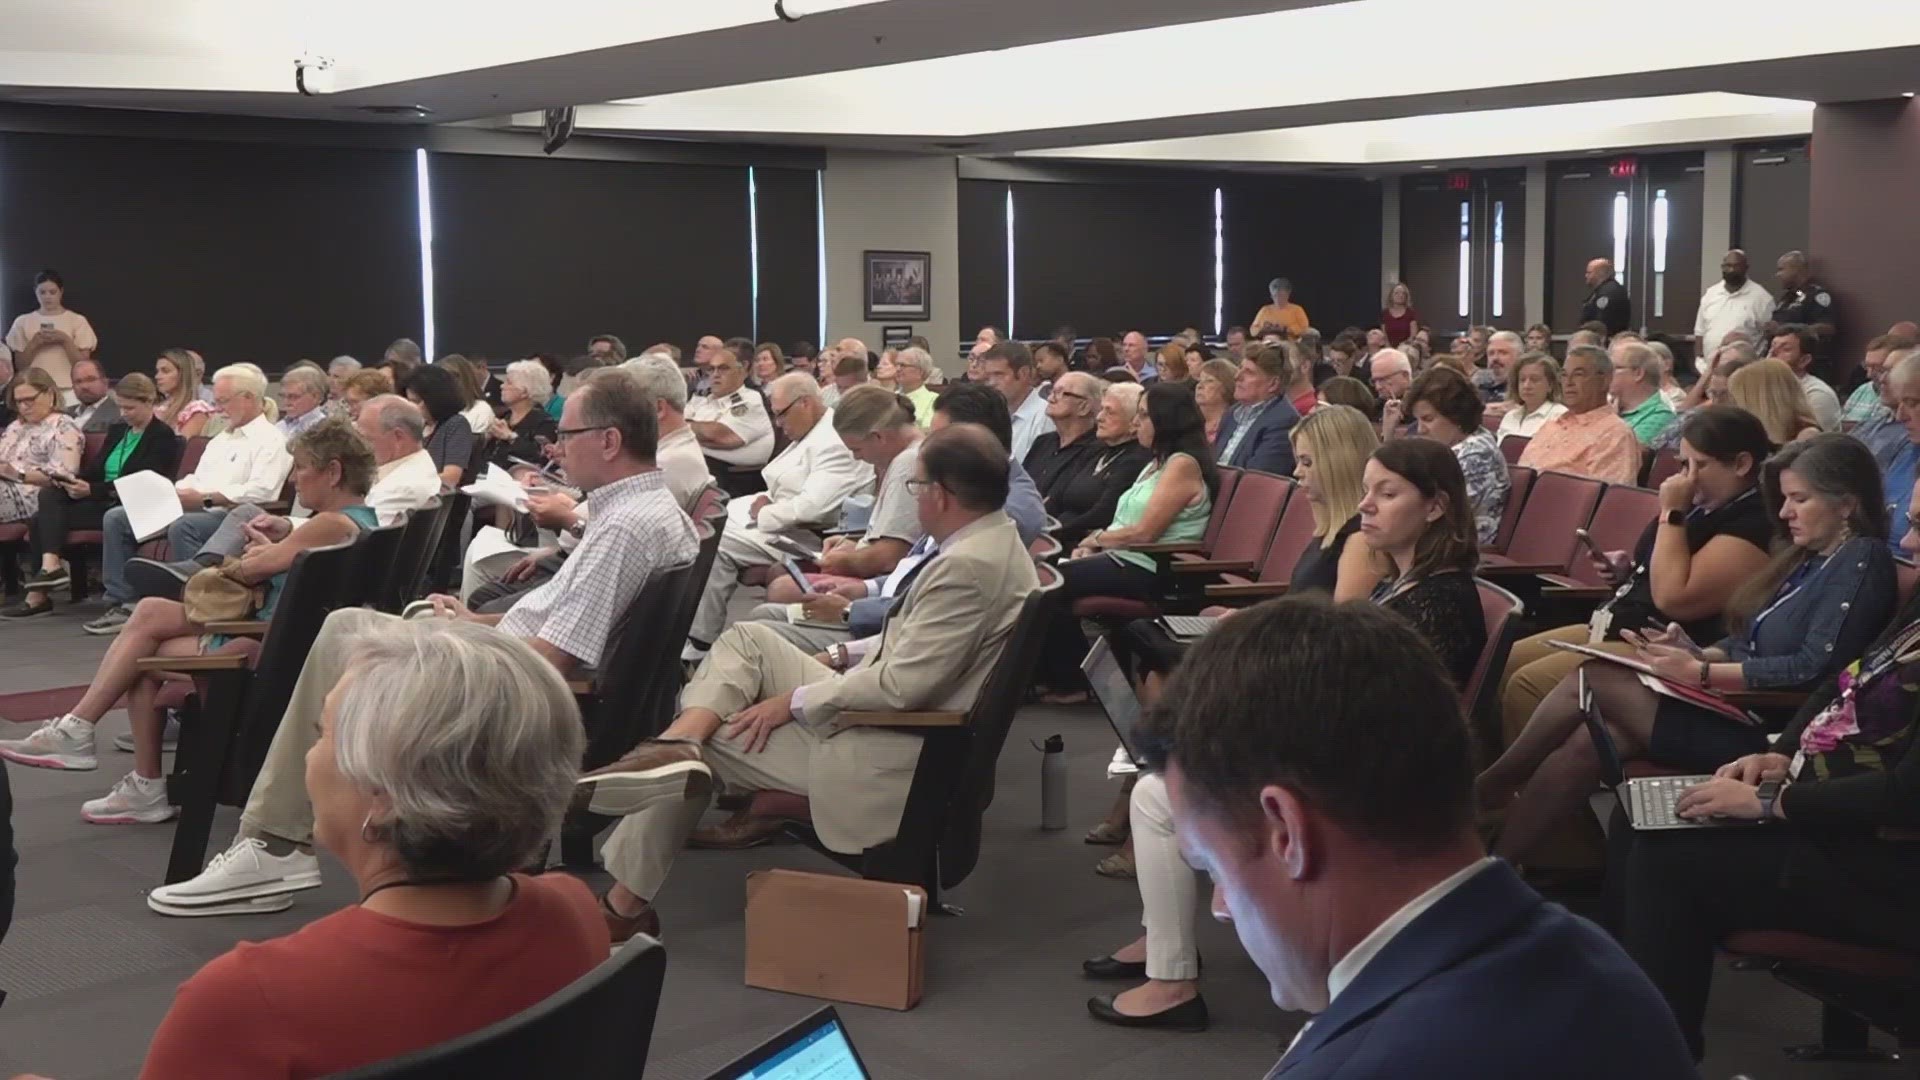 Wednesday, the Jefferson Parish Council listened to concerns as residents packed into the meeting room.